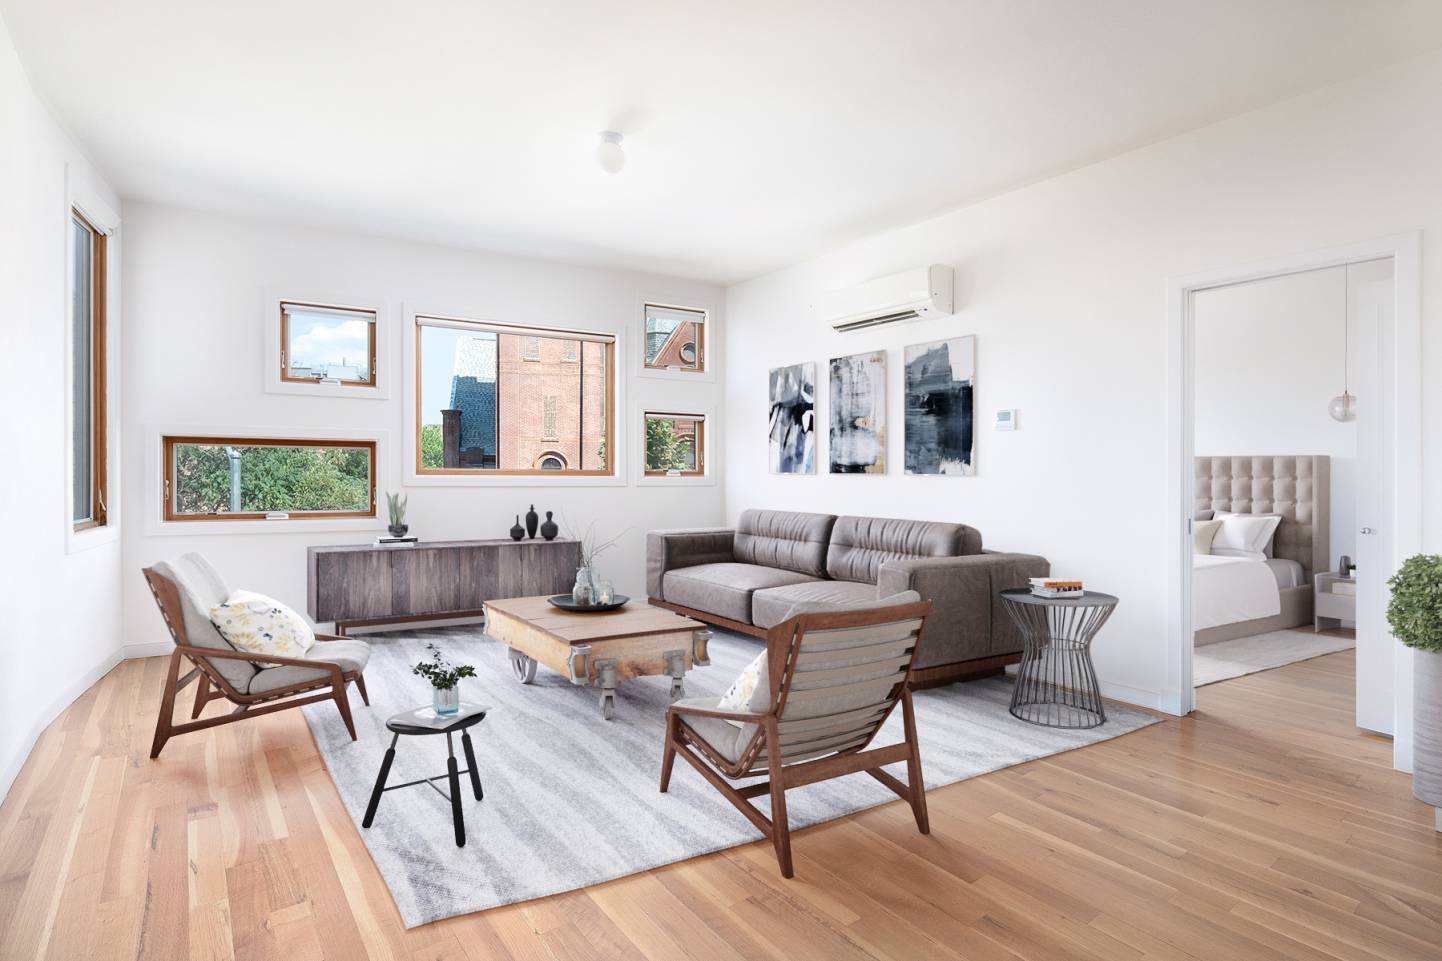 Enjoy gorgeous natural light and impeccable design in this fantastic two bedroom, two bathroom home in a chic, modern Clinton Hill condominium.